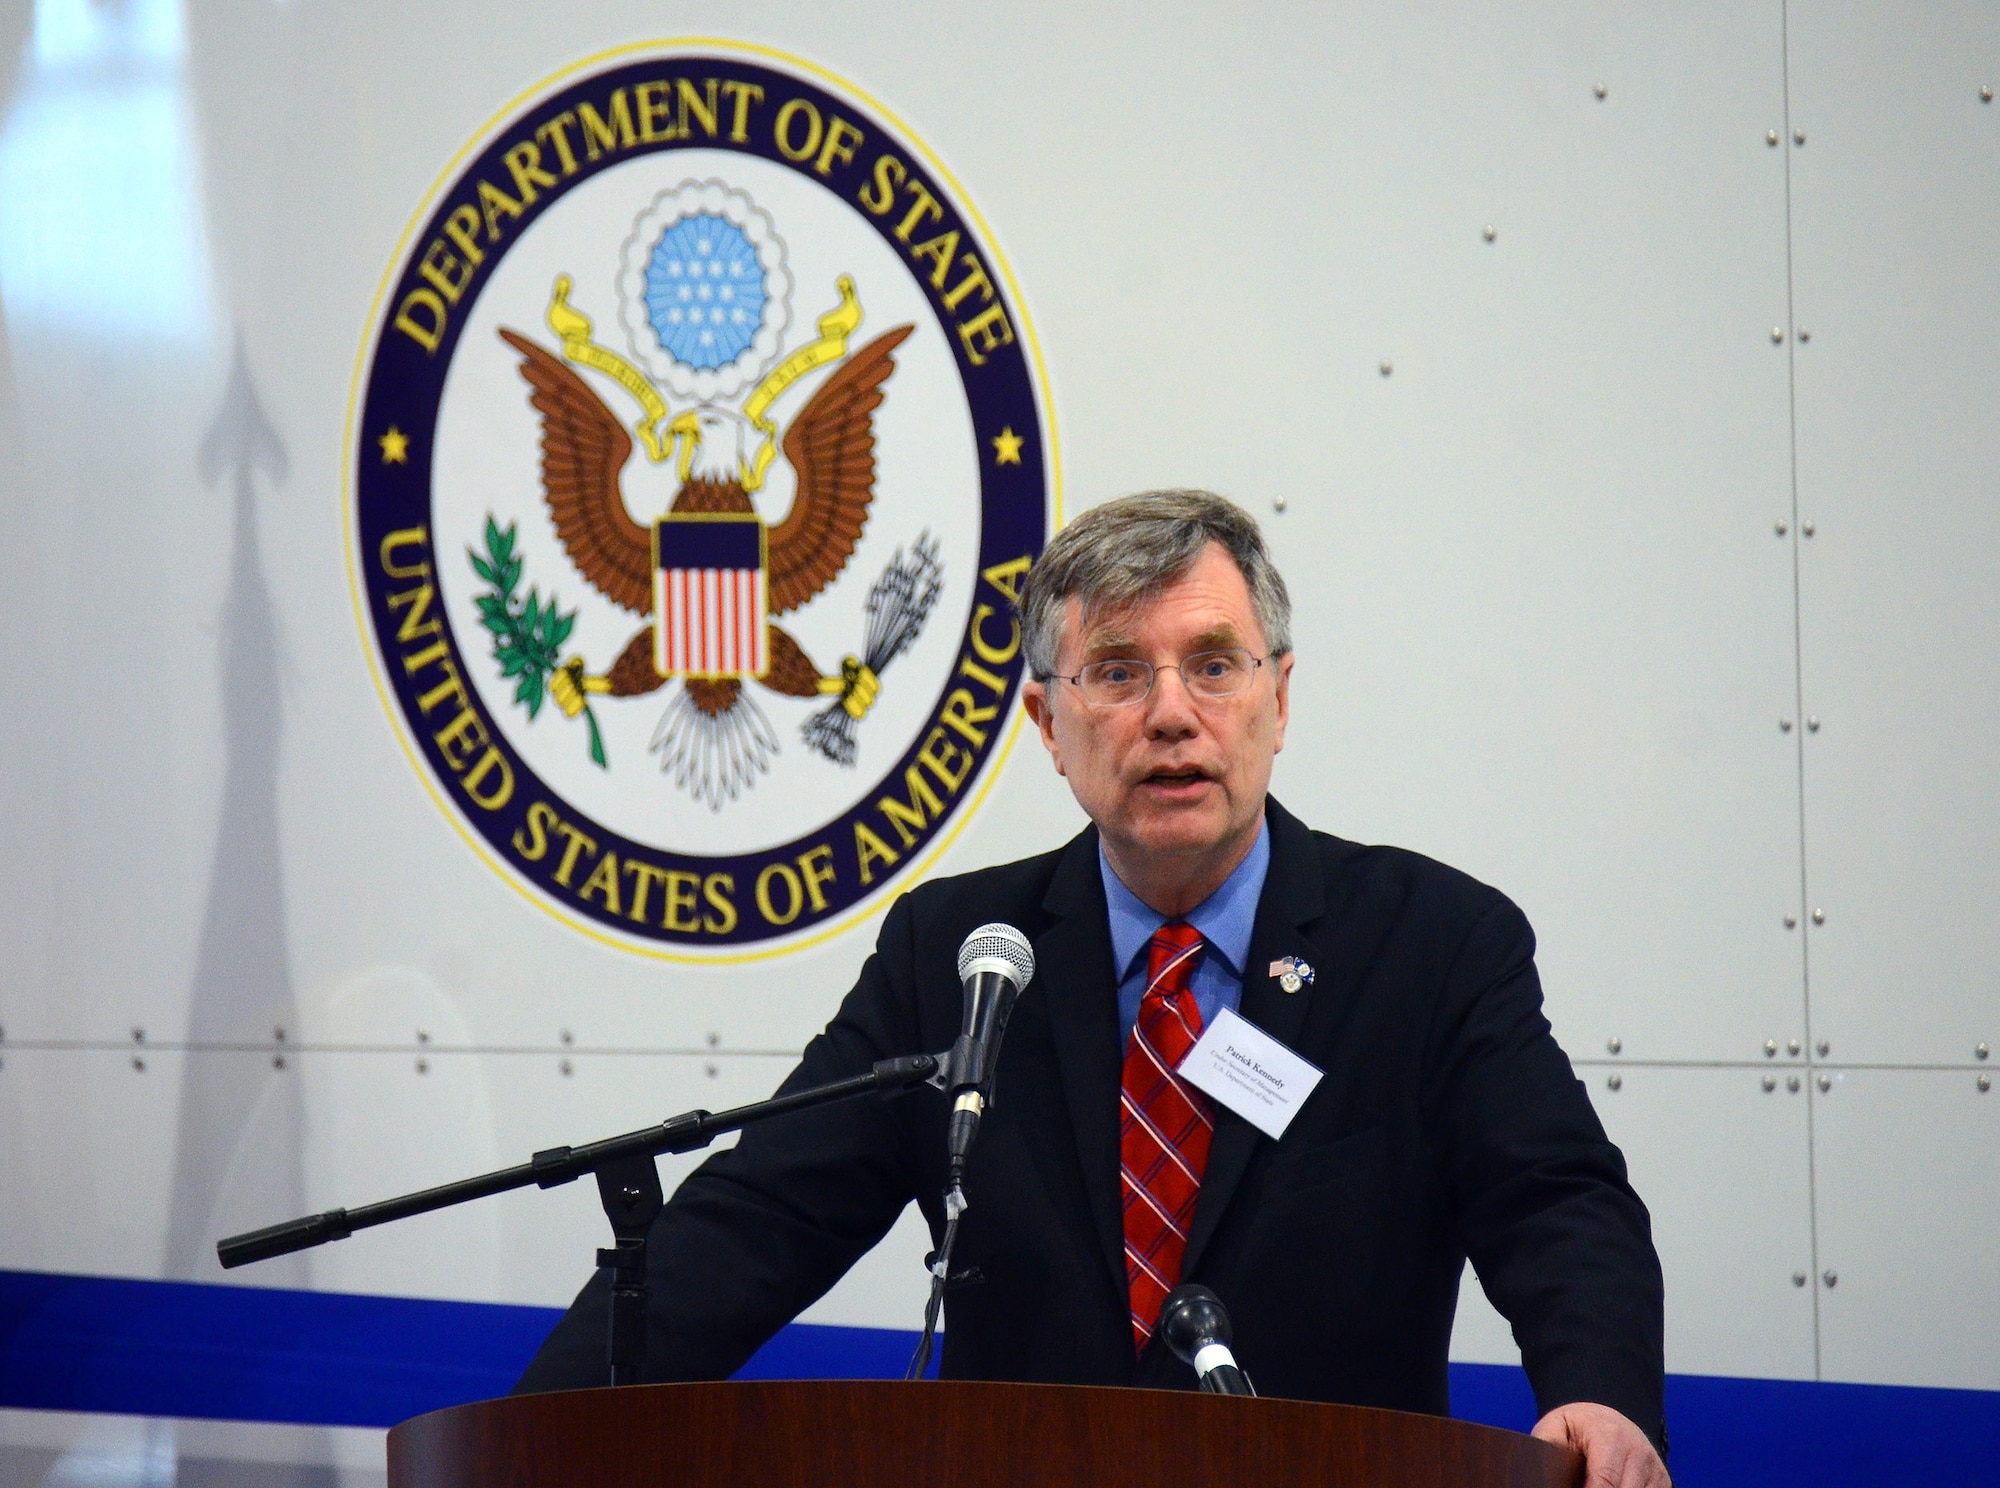 Patrick Kennedy, Under Secretary of Management from the U.S. State Department, gives remarks at the unveiling of the US State Department-sponsored Containerized Biocontainment Systems units at Dobbins Air Reserve Base, Ga., Aug. 11, 2015. The two Containerized Biocontainment units were built by MRIGlobal through a partnership with the U.S. State Dept. and the Paul G. Allen Ebola Program, and will be positioned at Dobbins ARB, ready for future. (U.S. Air Force photo/ Brad Fallin)